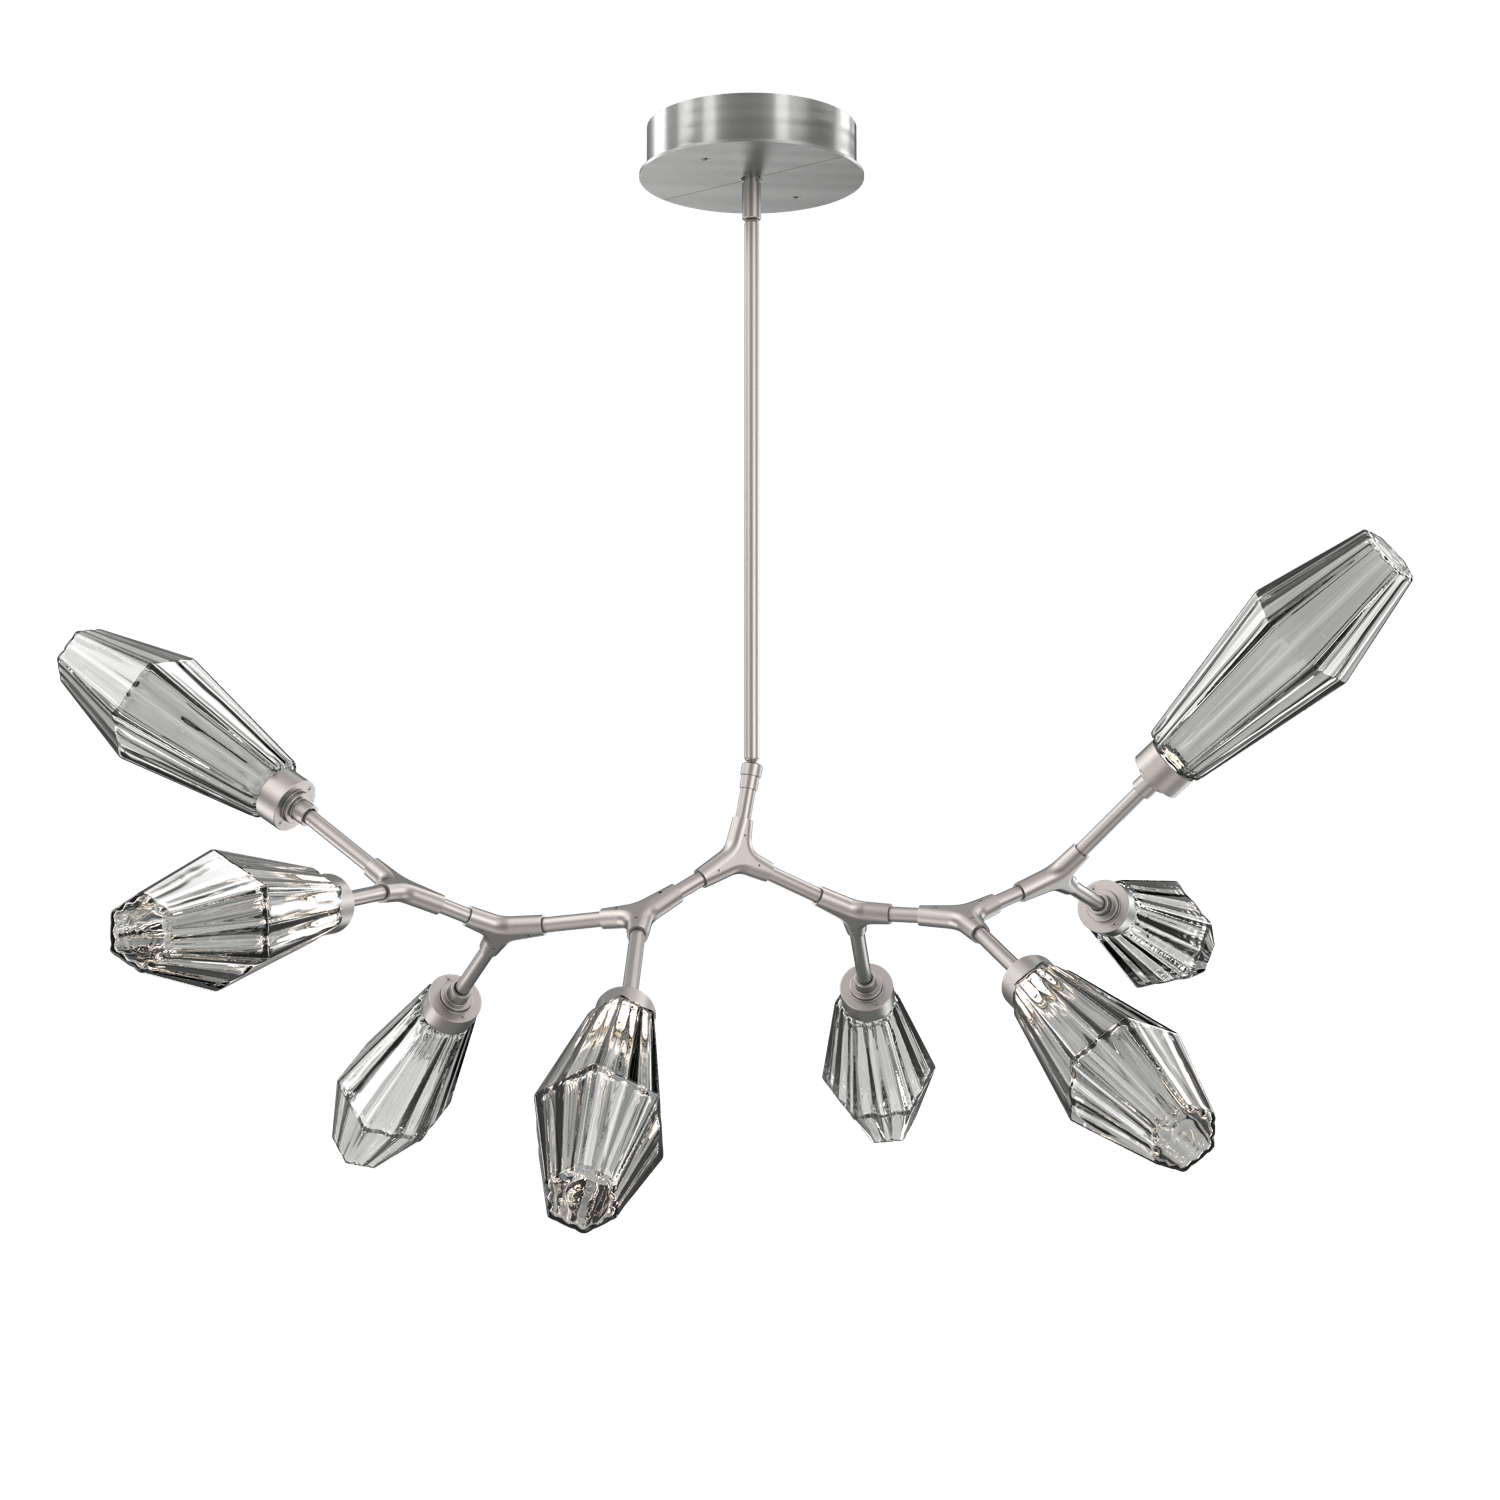 PLB0049-BB-SN-RS-Hammerton-Studio-Aalto-8-light-modern-branch-chandelier-with-satin-nickel-finish-and-optic-ribbed-smoke-glass-shades-and-LED-lamping